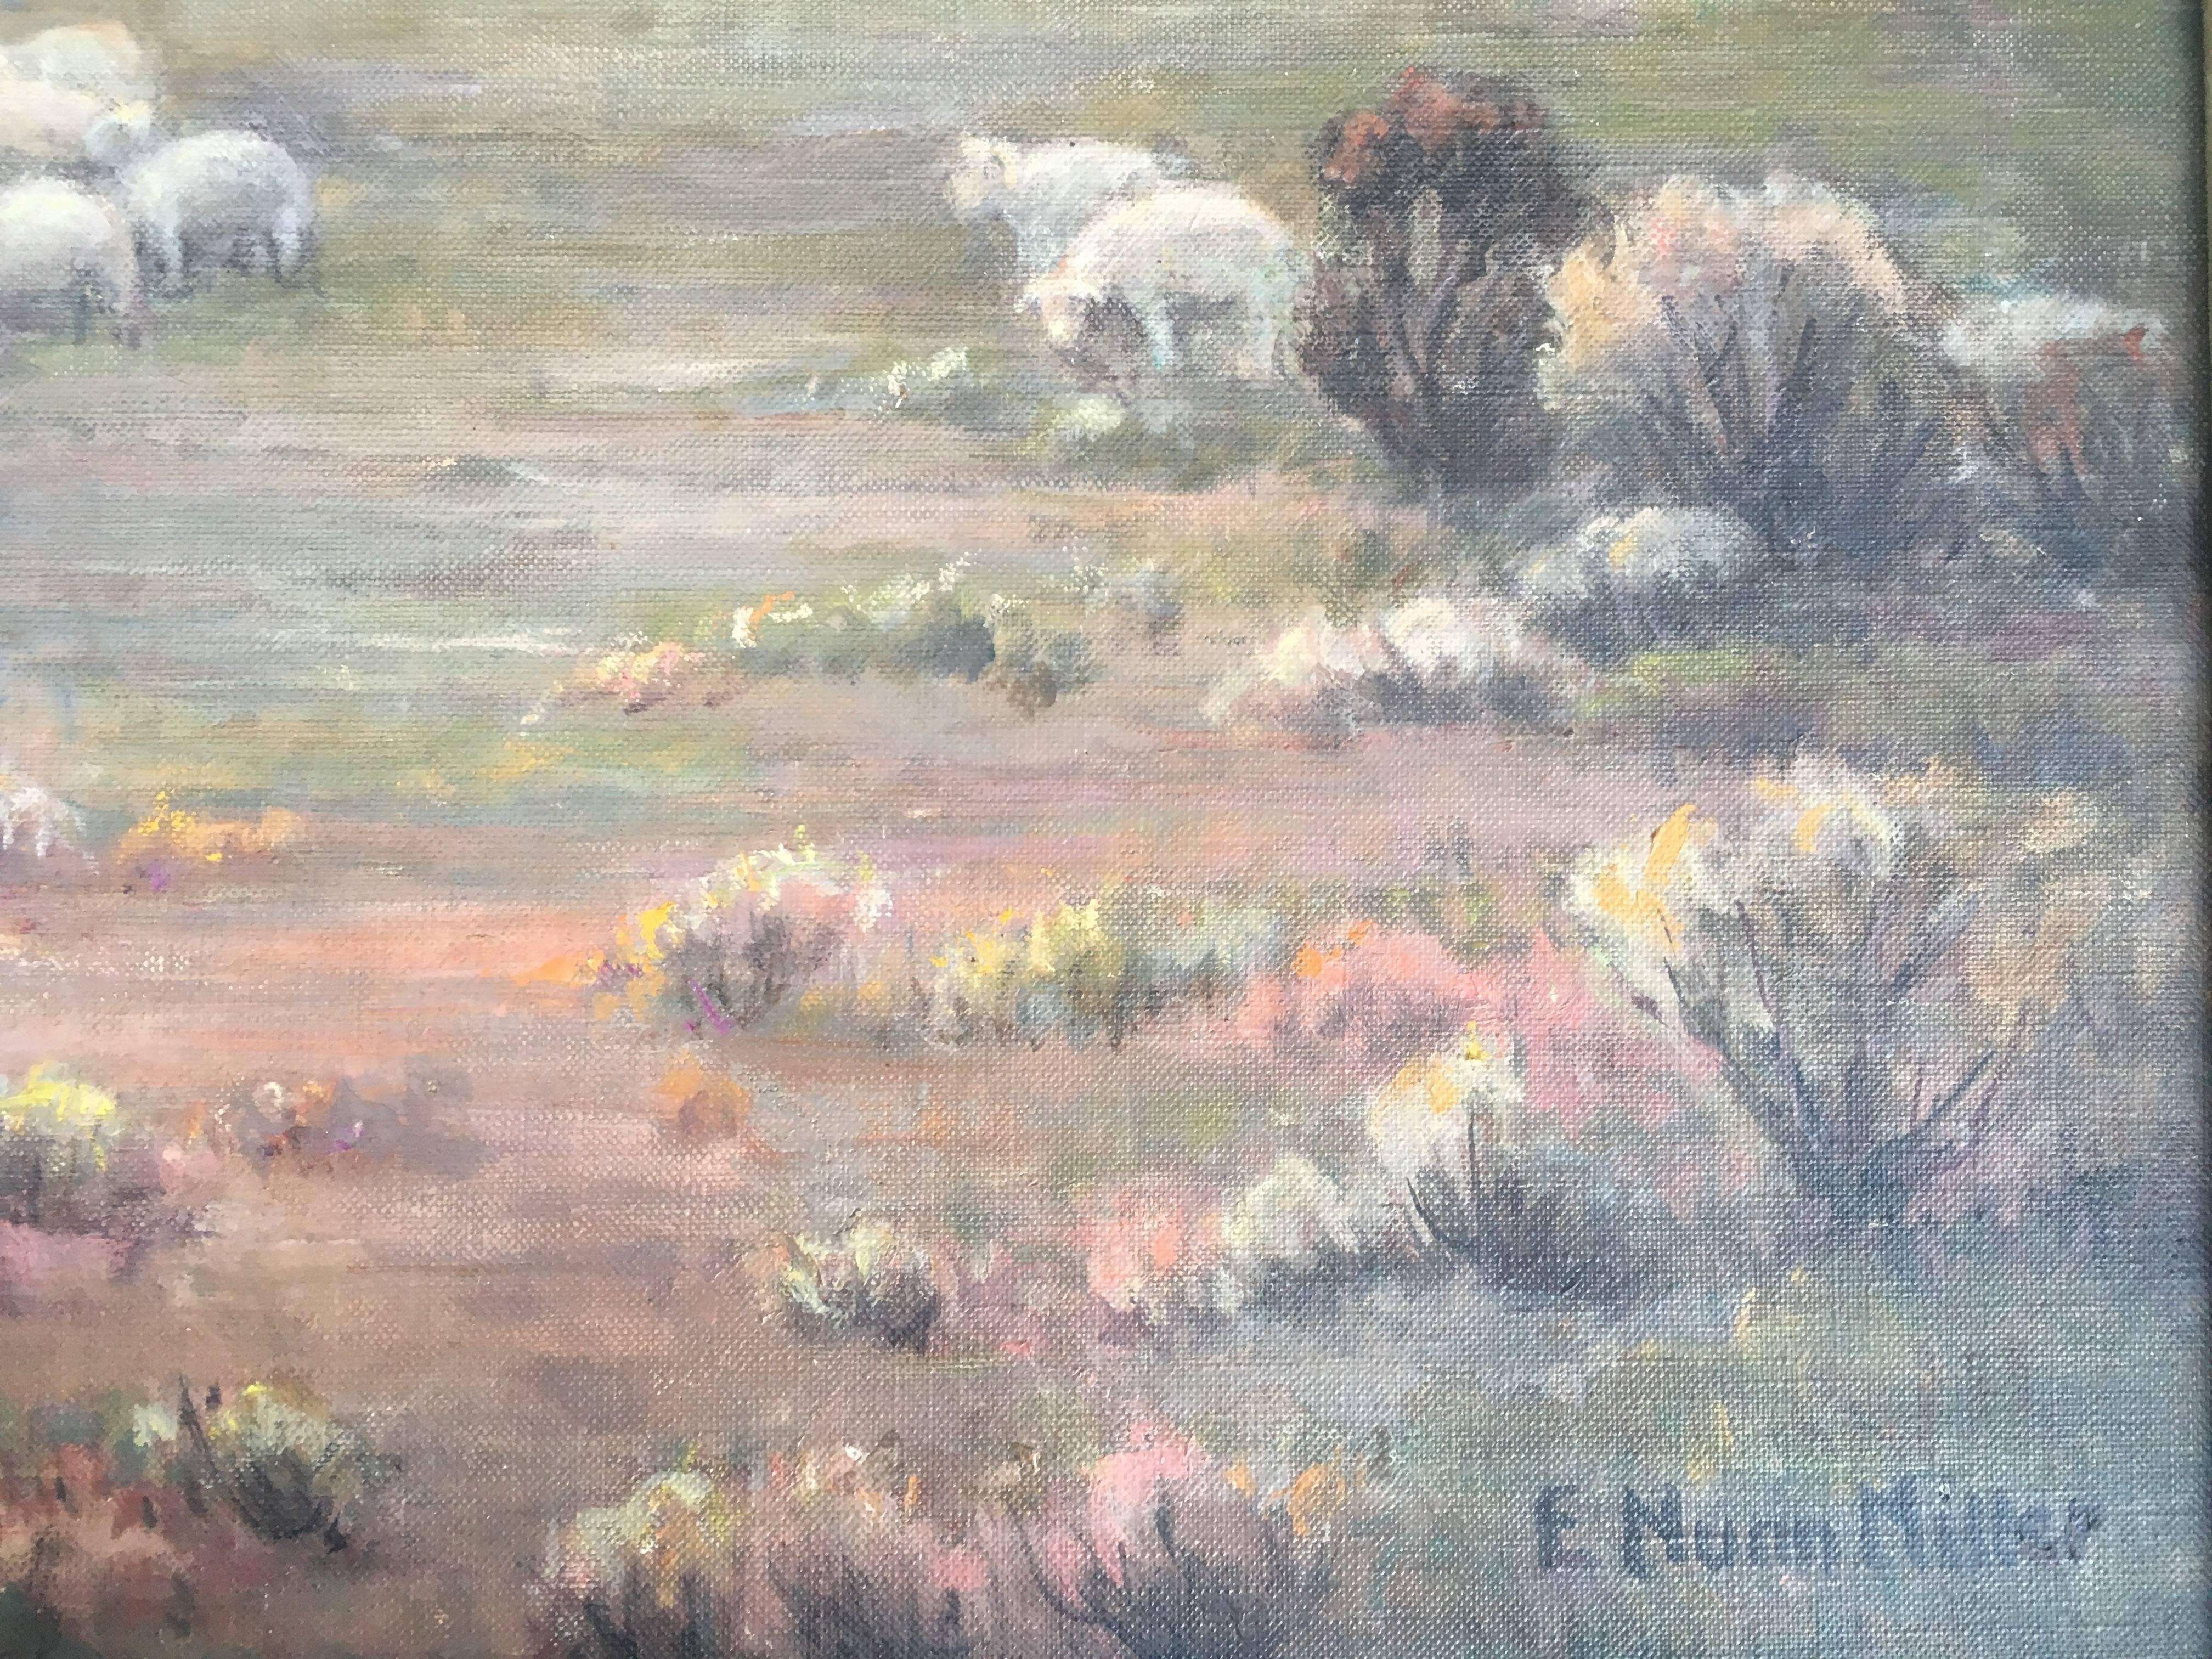 Nomads in the Holy Land Tending Their Flock of Sheep - Gray Landscape Painting by Evylyna Nunn Miller